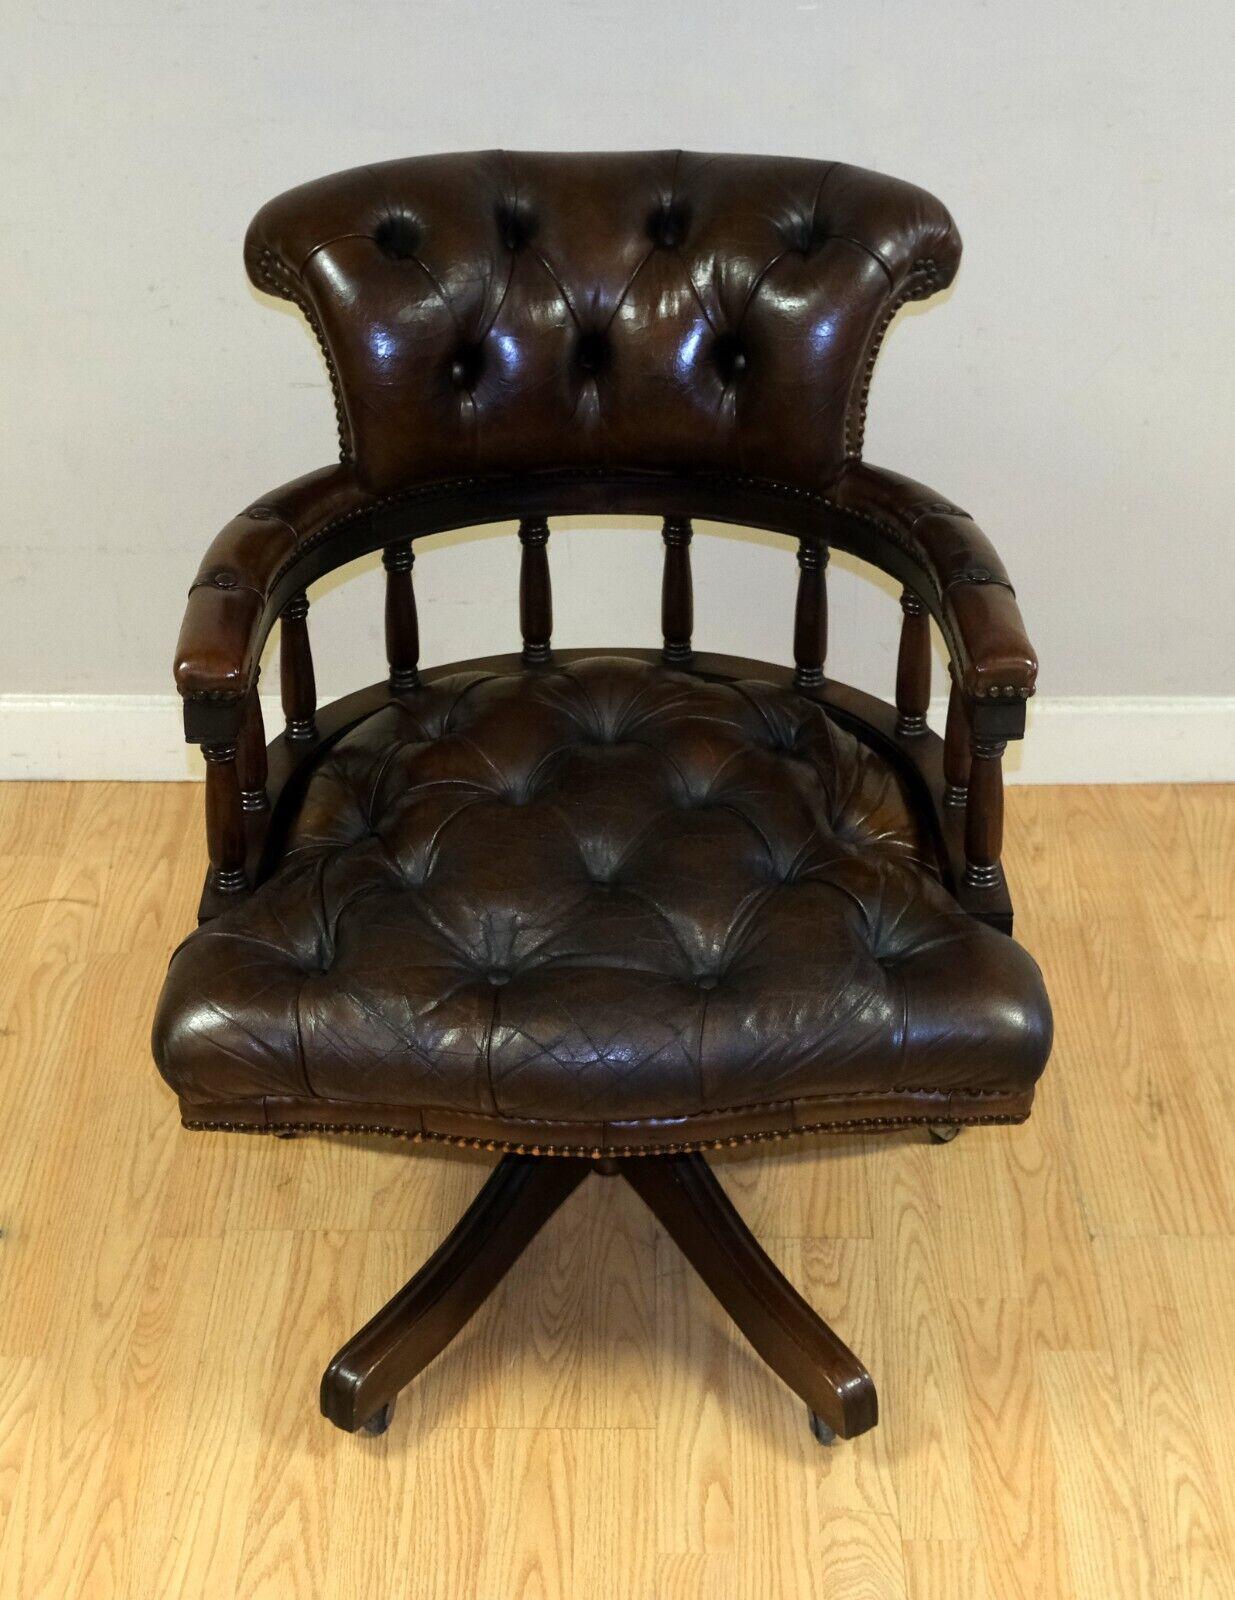 We are delighted to offer for sale this lovely fully restored oak frame chesterfield cigar brown leather captain armchair.

This piece combines style and attractiveness, which would add glamour to your office or any room. This piece has been